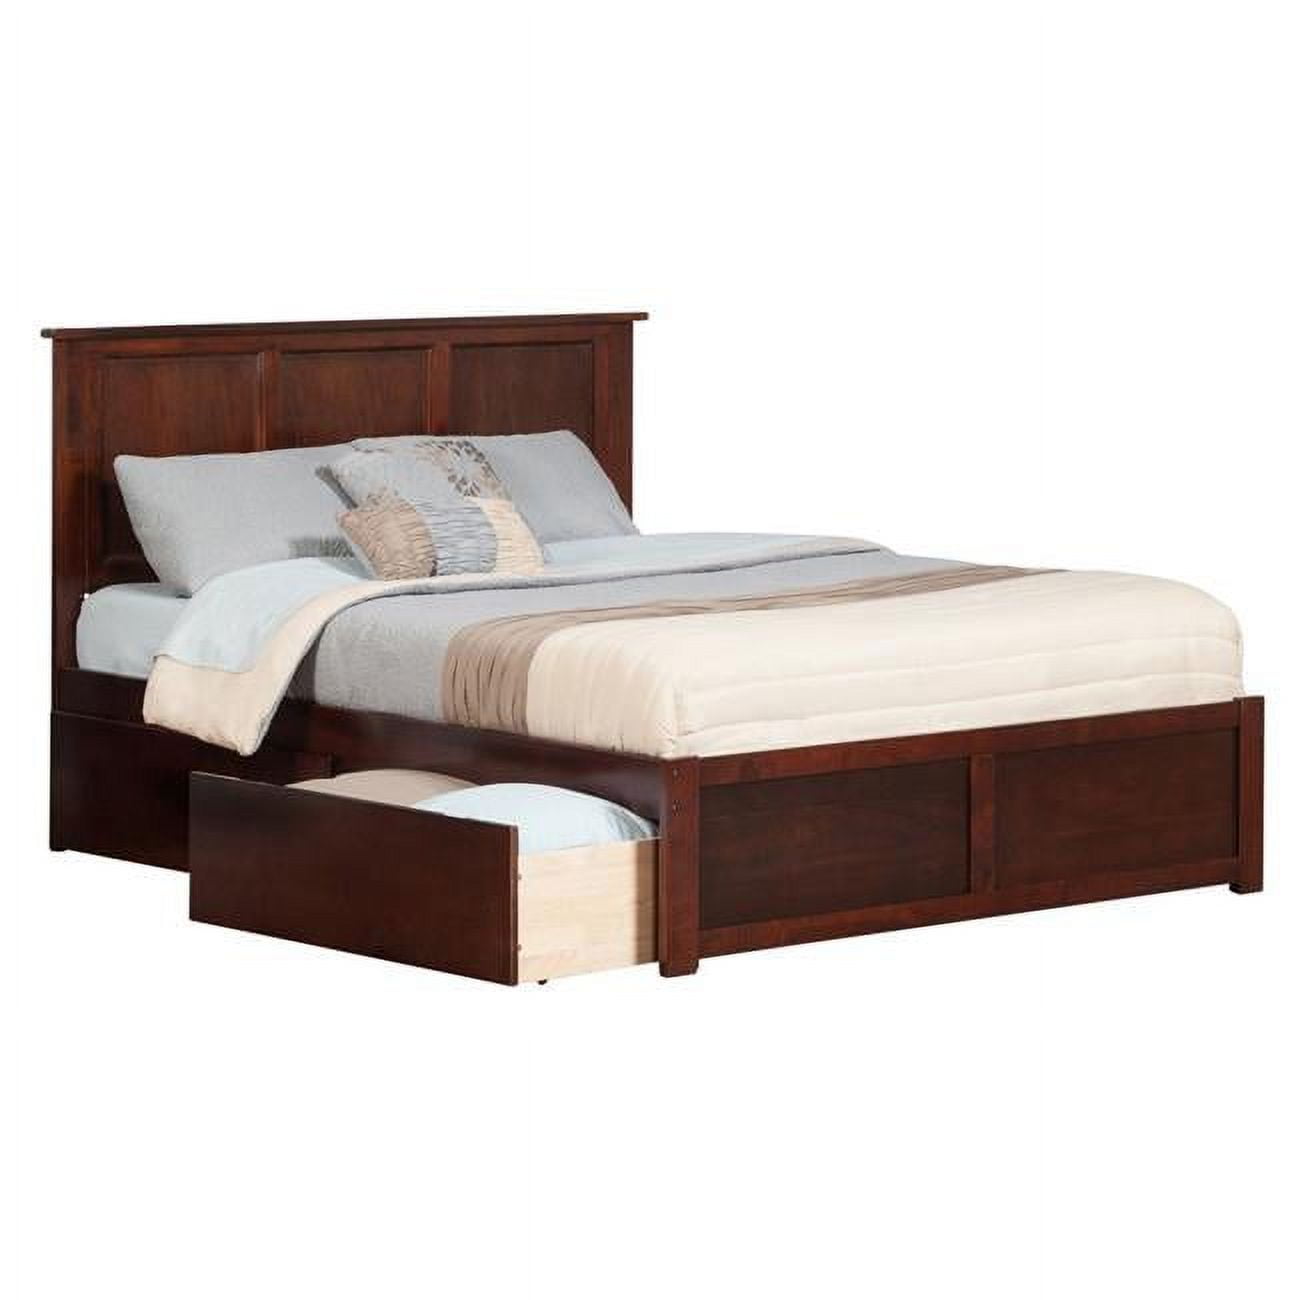 Picture of Atlantic Furniture AR8616111 Madison Extra Large Match Footboard with Urban Bed Drawers x 1 - Espresso, Twin Size